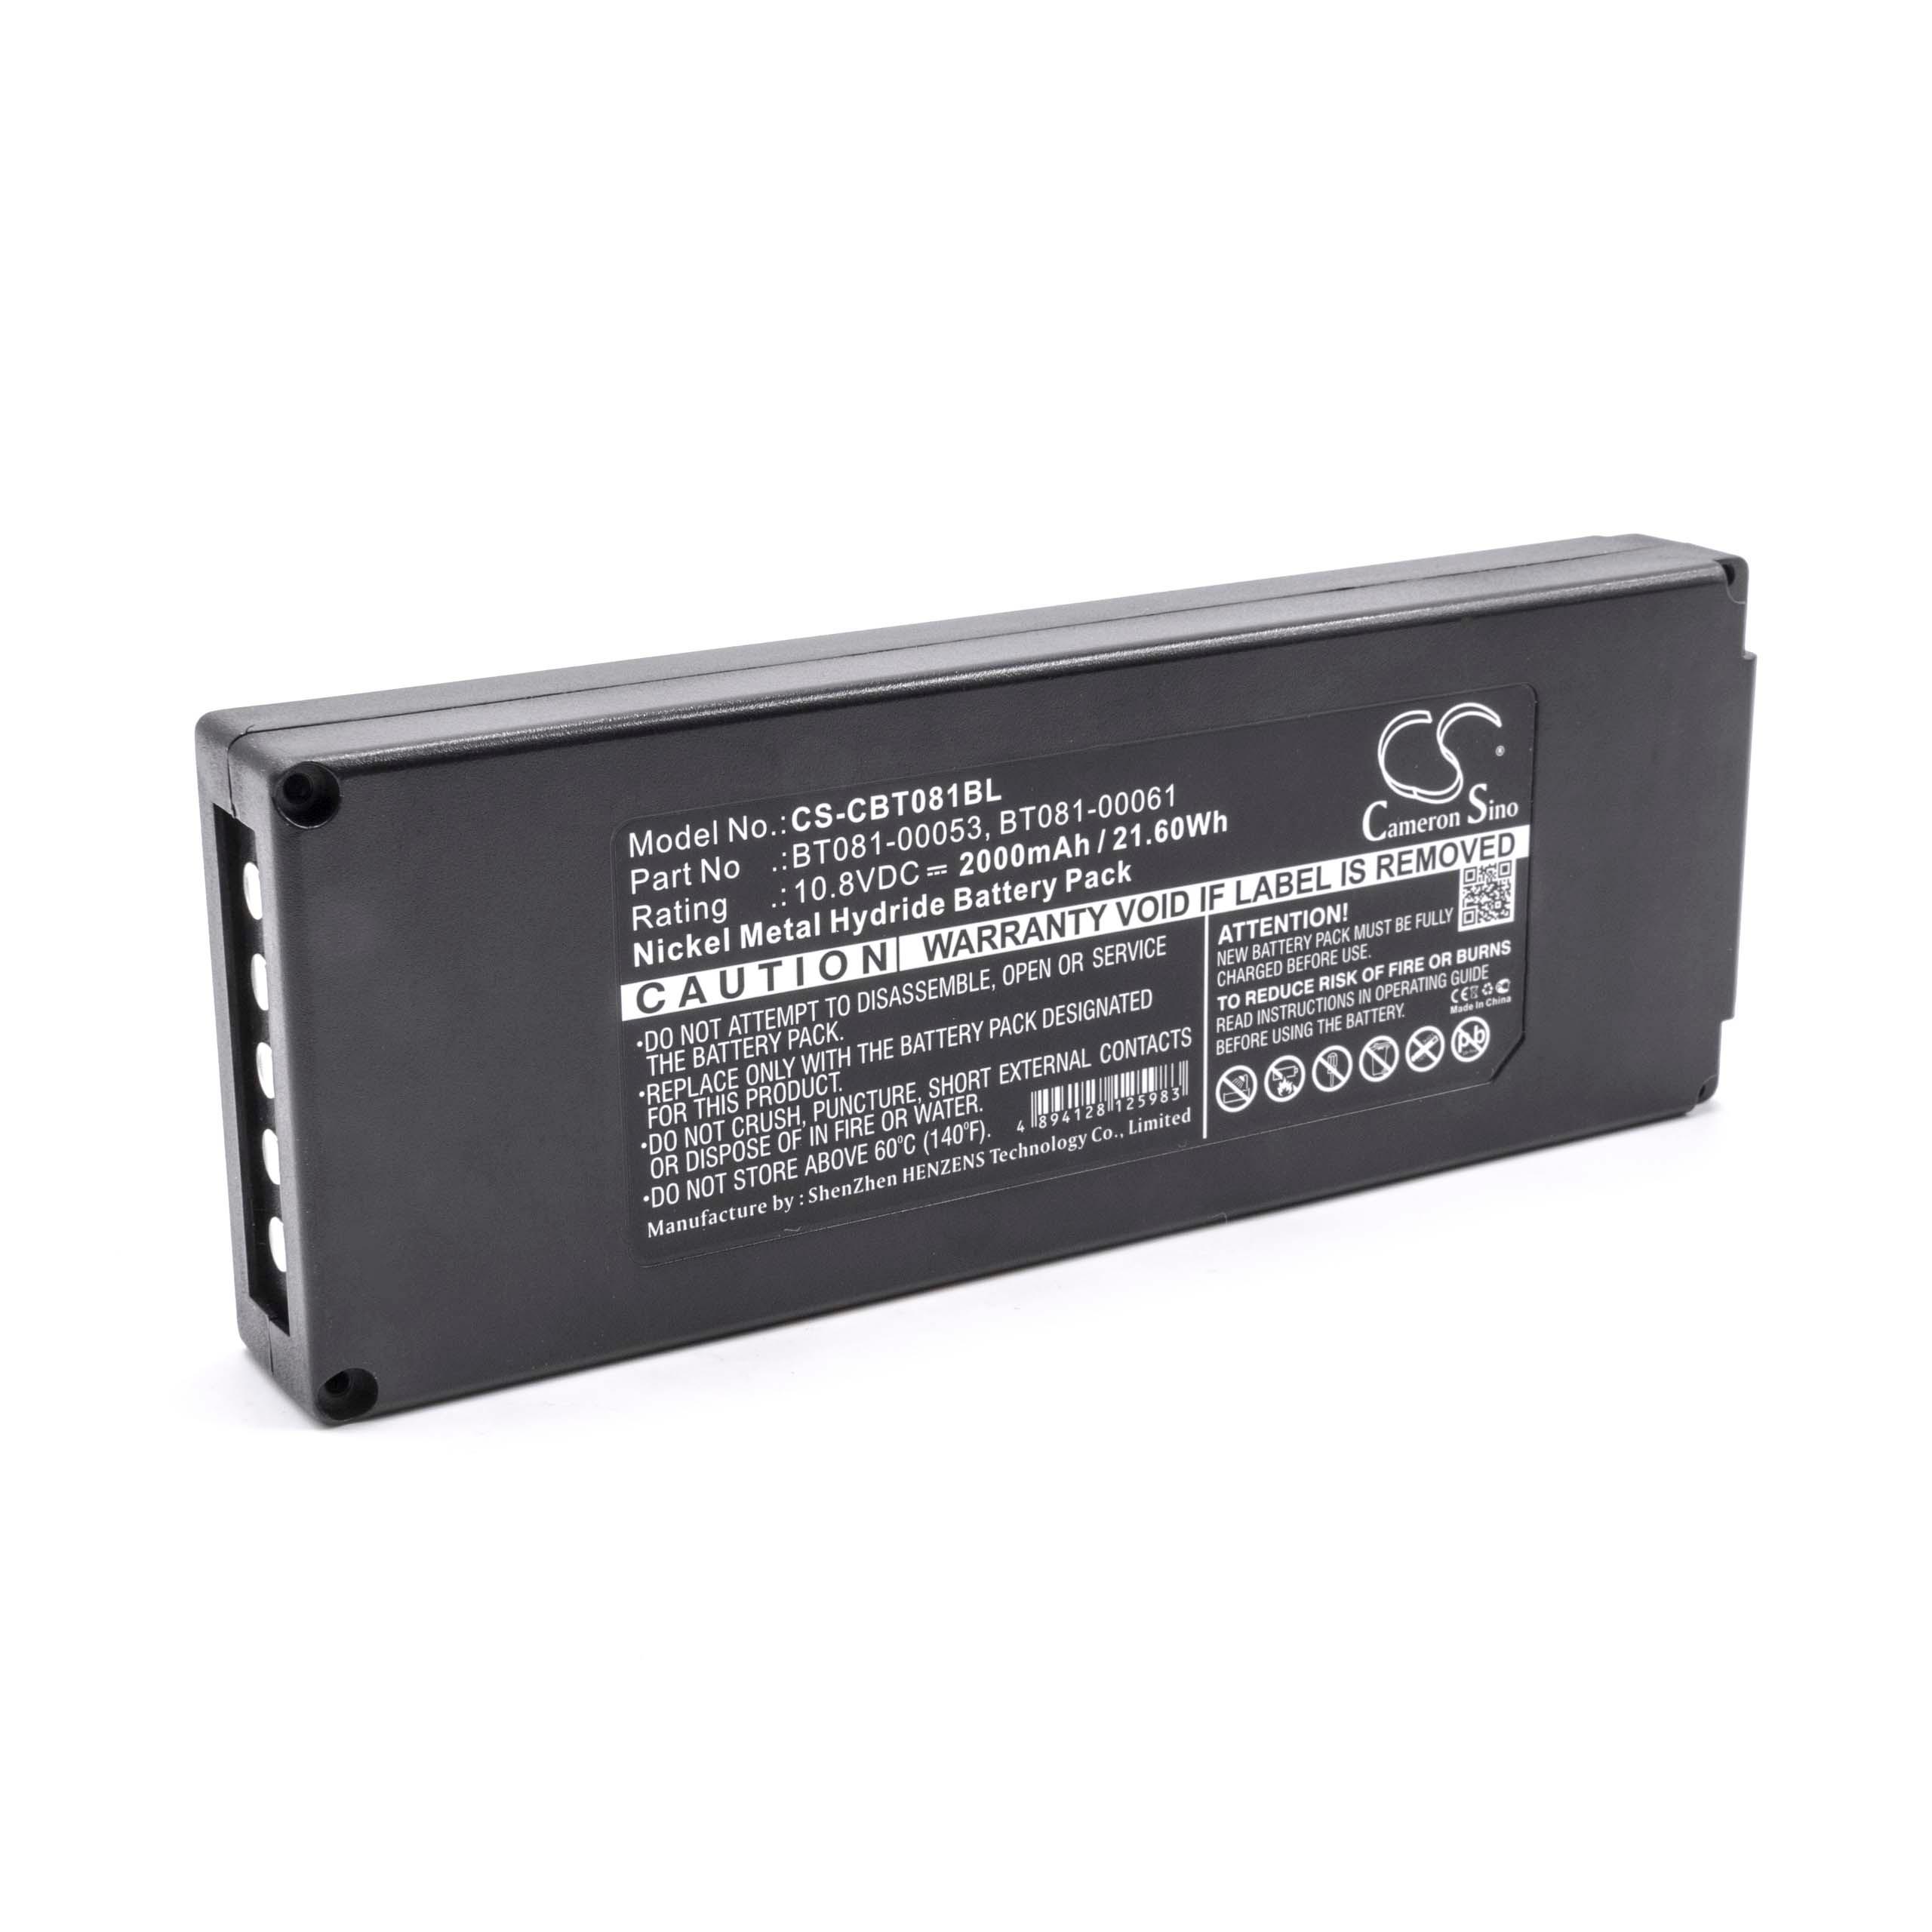 Remote Control Battery Replacement for Cattron-Theimeg BT081-00053, B5018-00061 - 2000mAh 10.8V NiMH